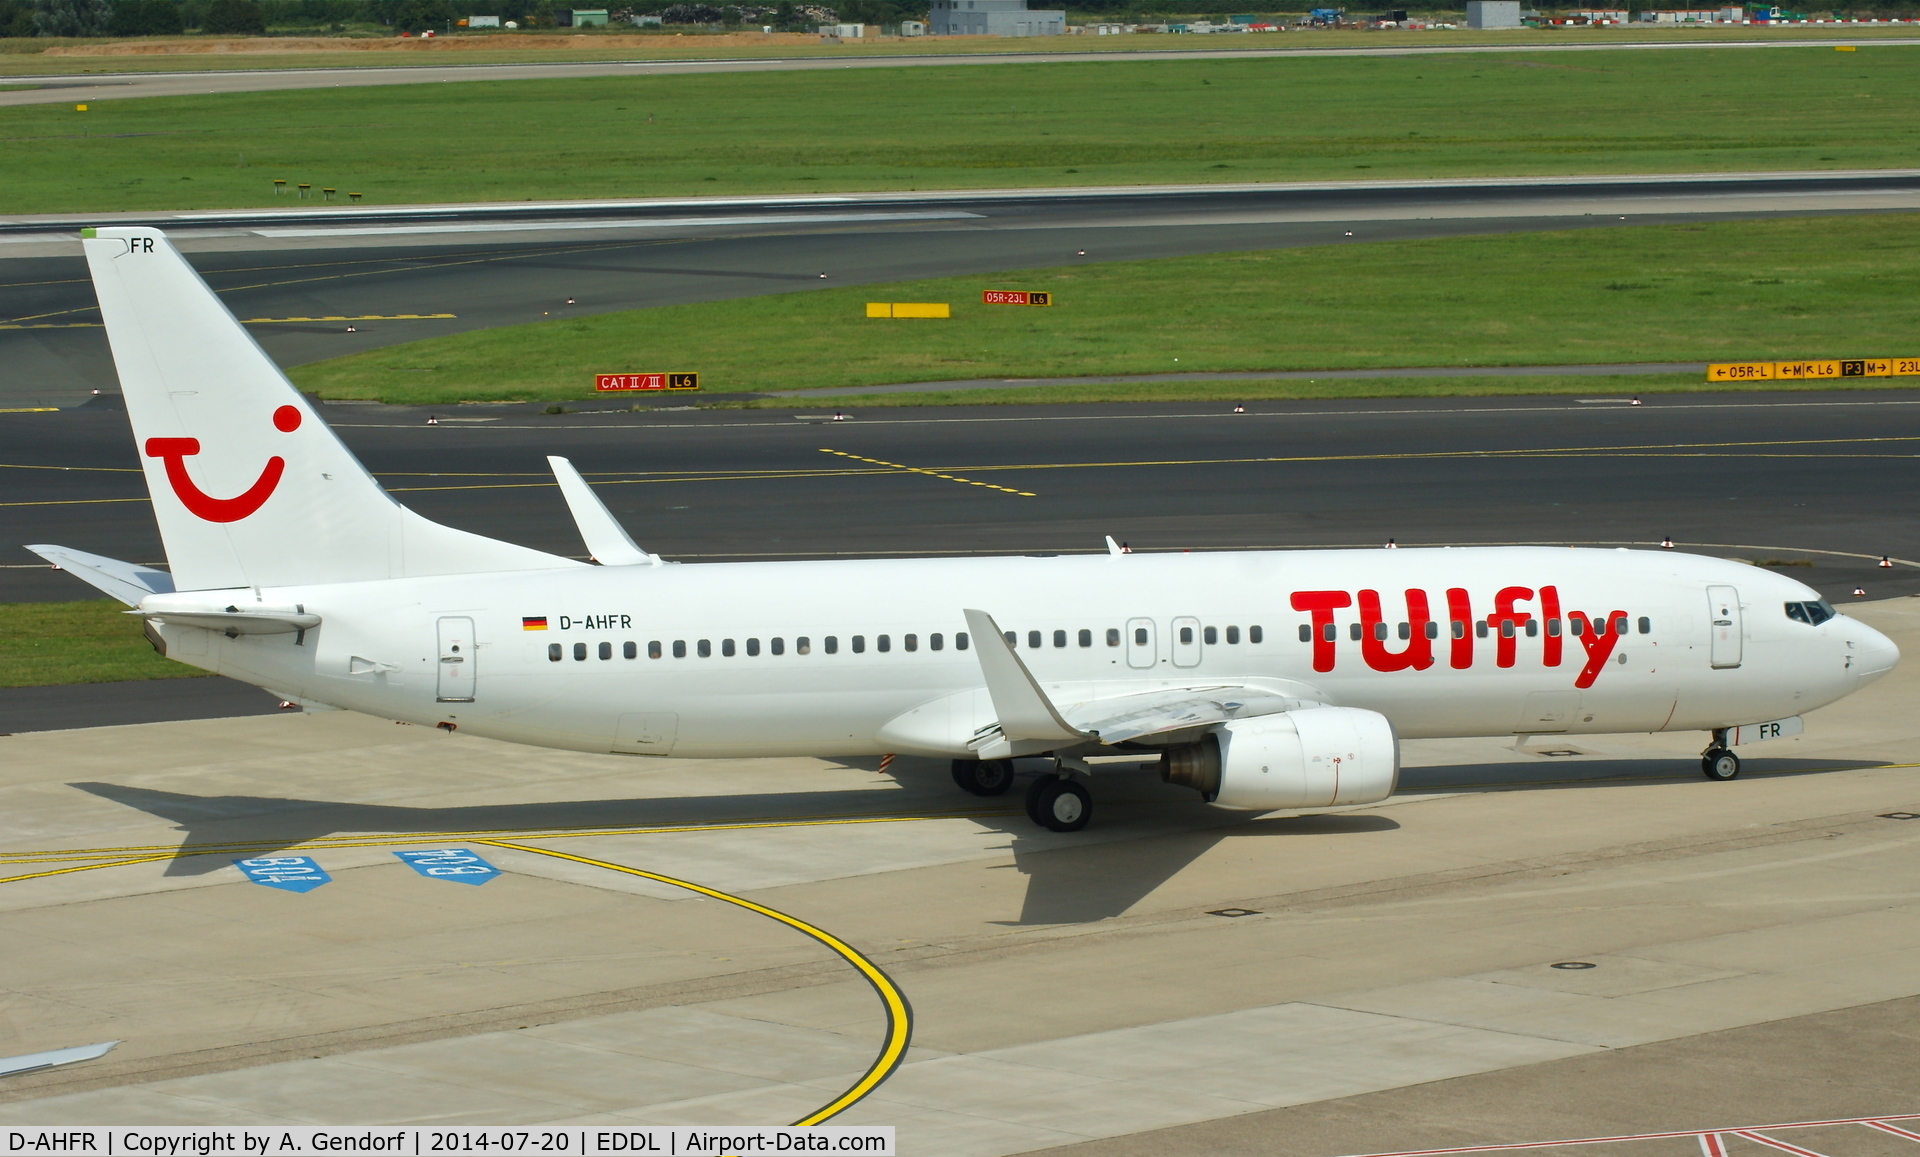 D-AHFR, 2000 Boeing 737-8K5 C/N 30593, TUifly, is here on the apron at Düsseldorf Int'l(EDDL)